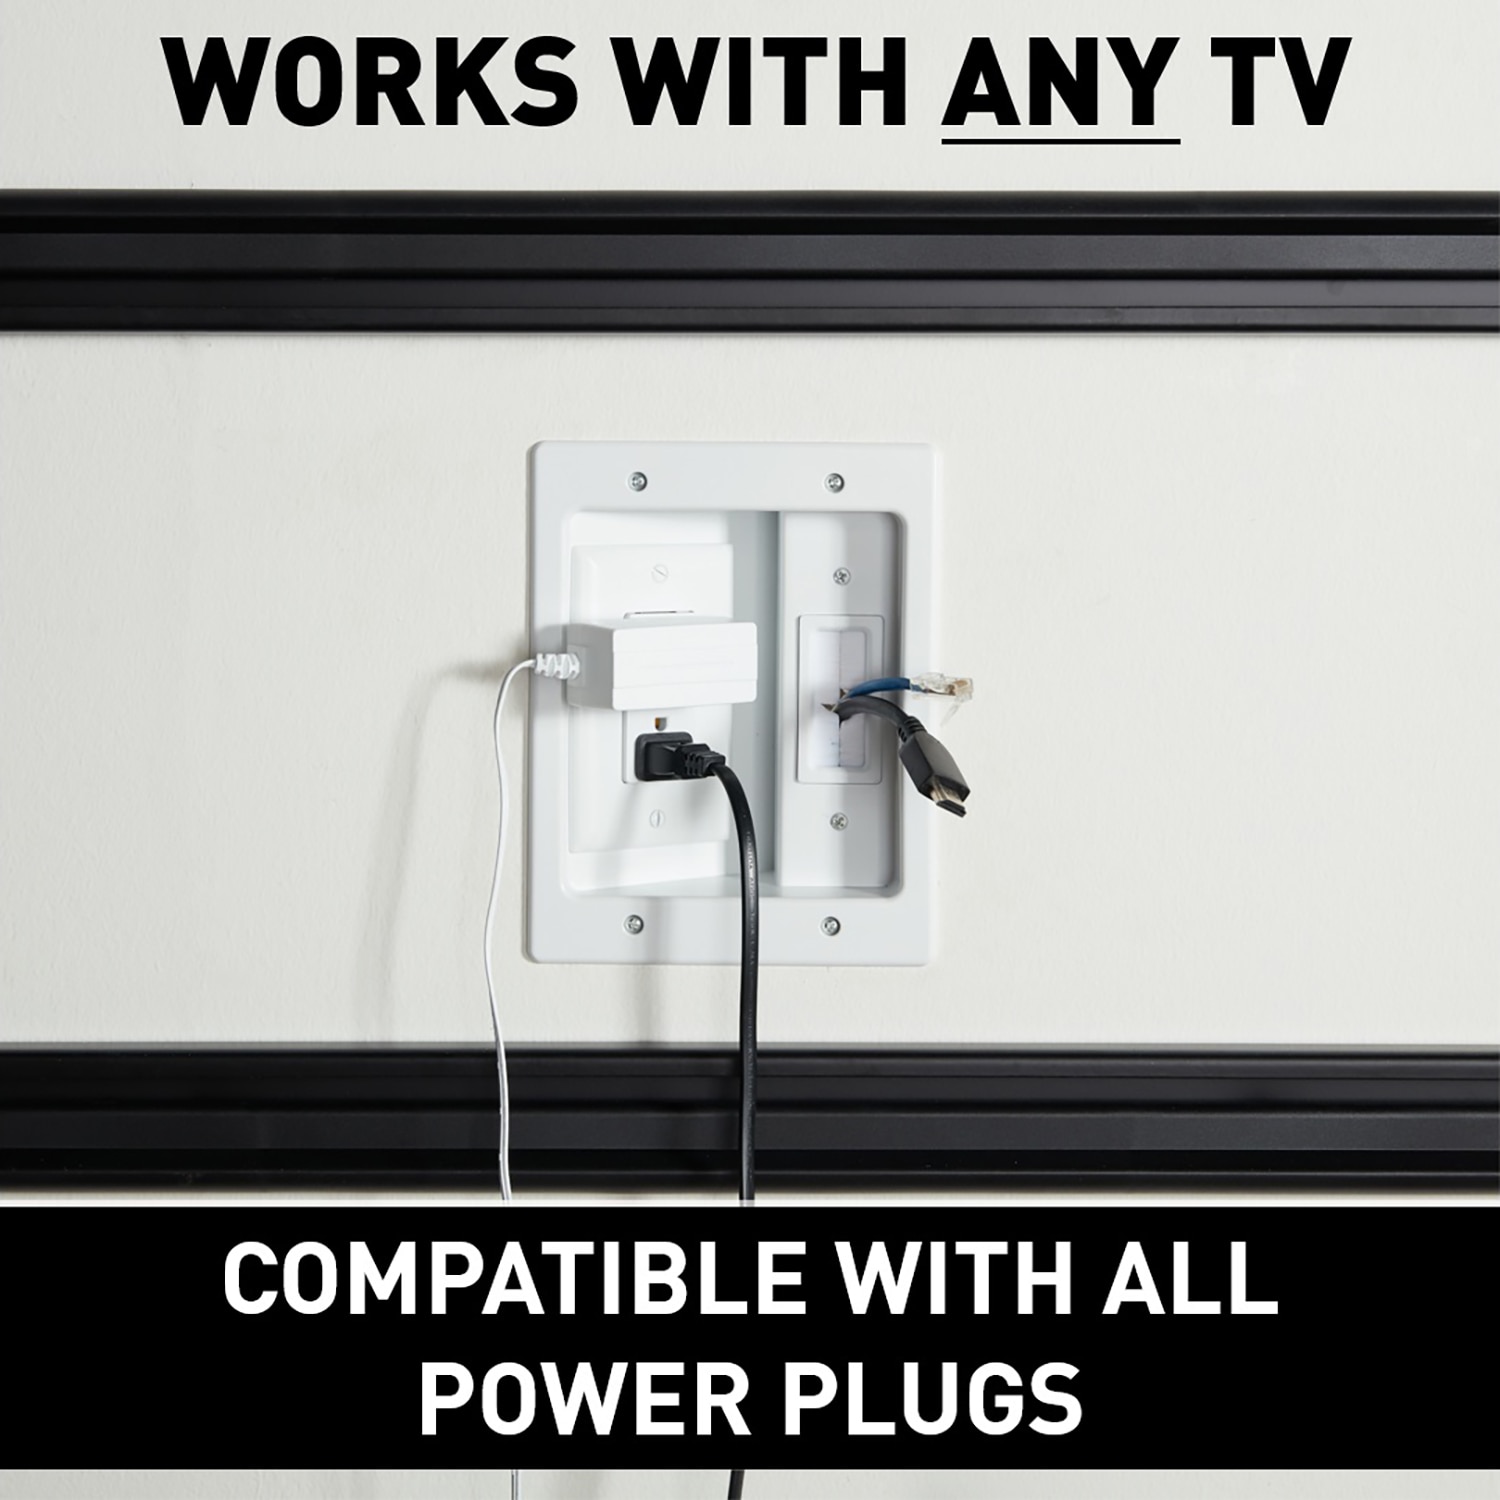 SANUS Simplicity In-wall Power and Cable Management Kit